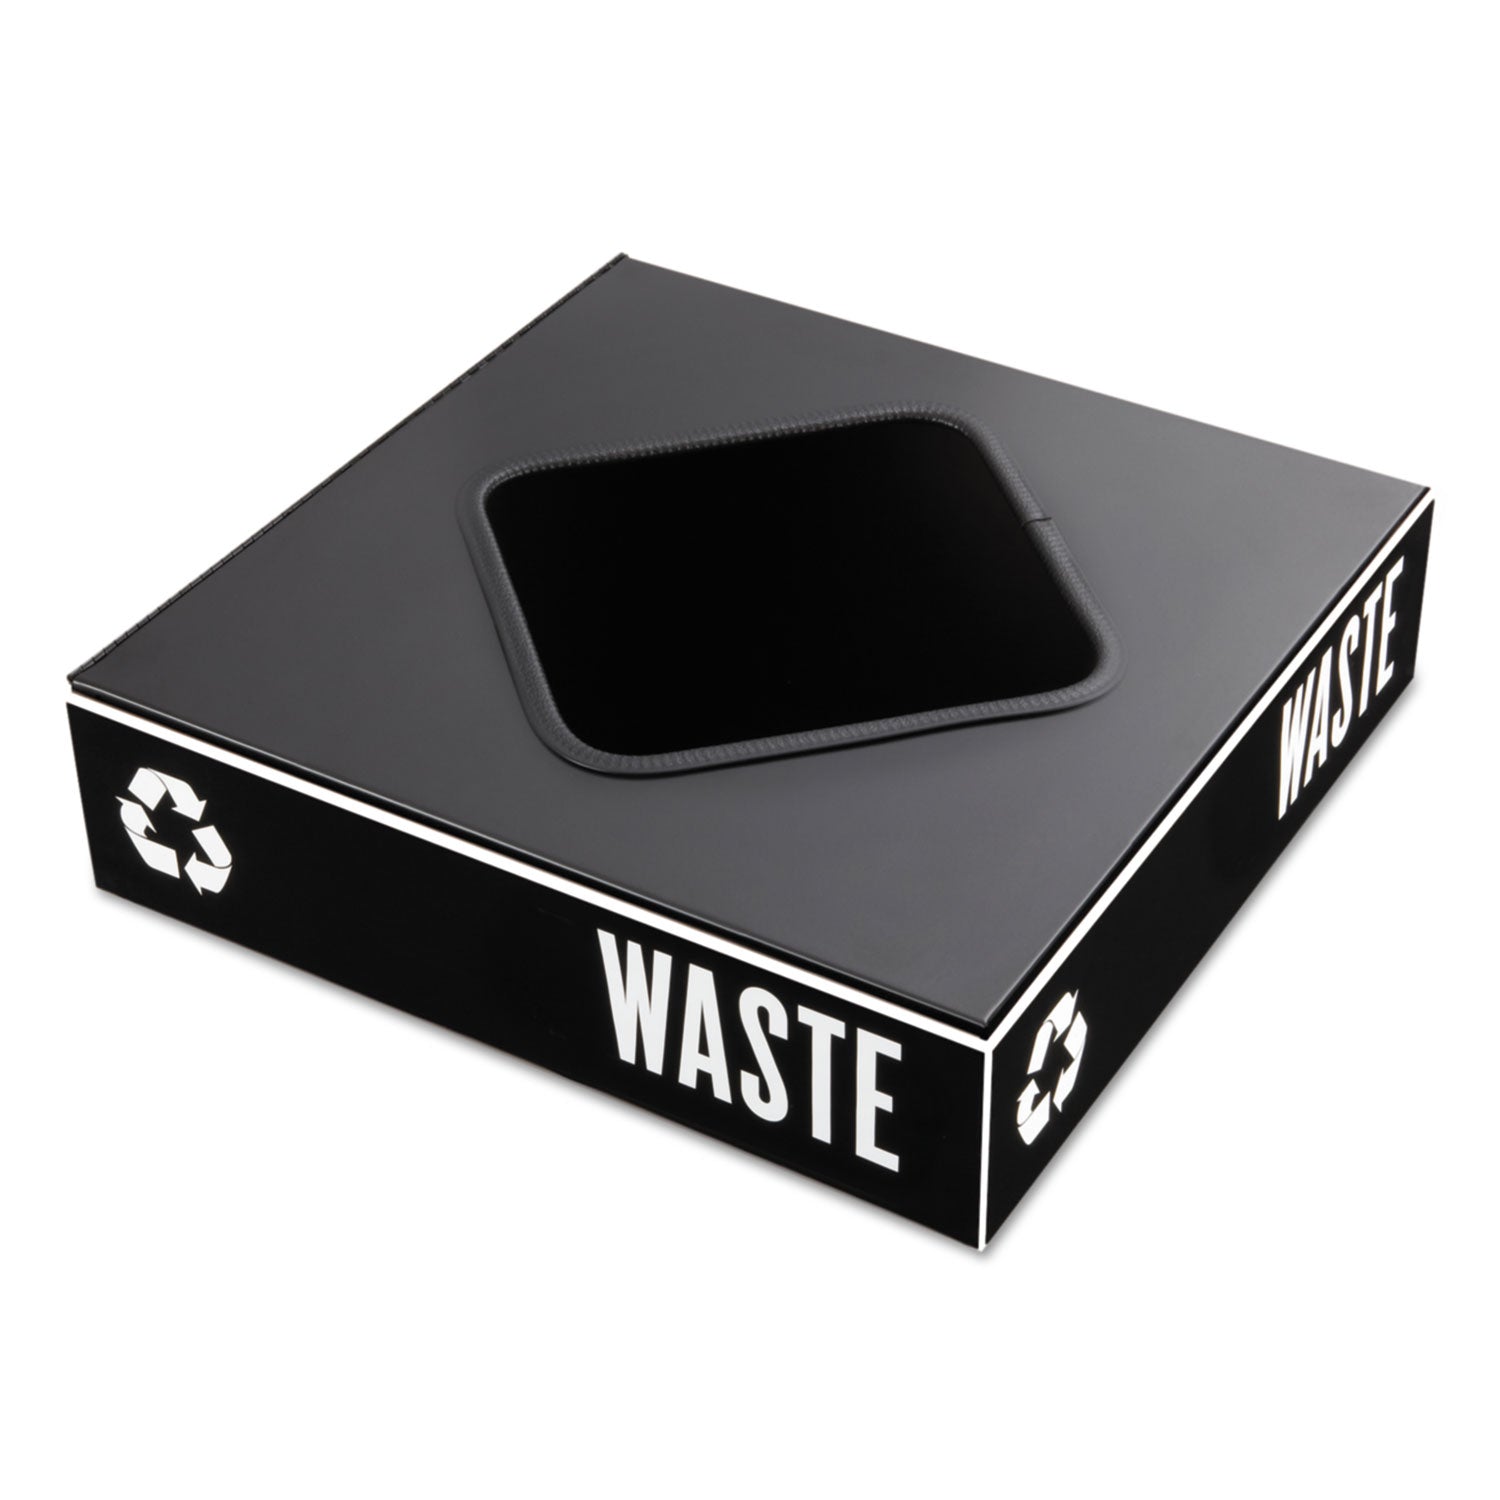 Public Square Recycling Container Lid, Square Opening, 15.25w x 15.25d x 2h, Black - 